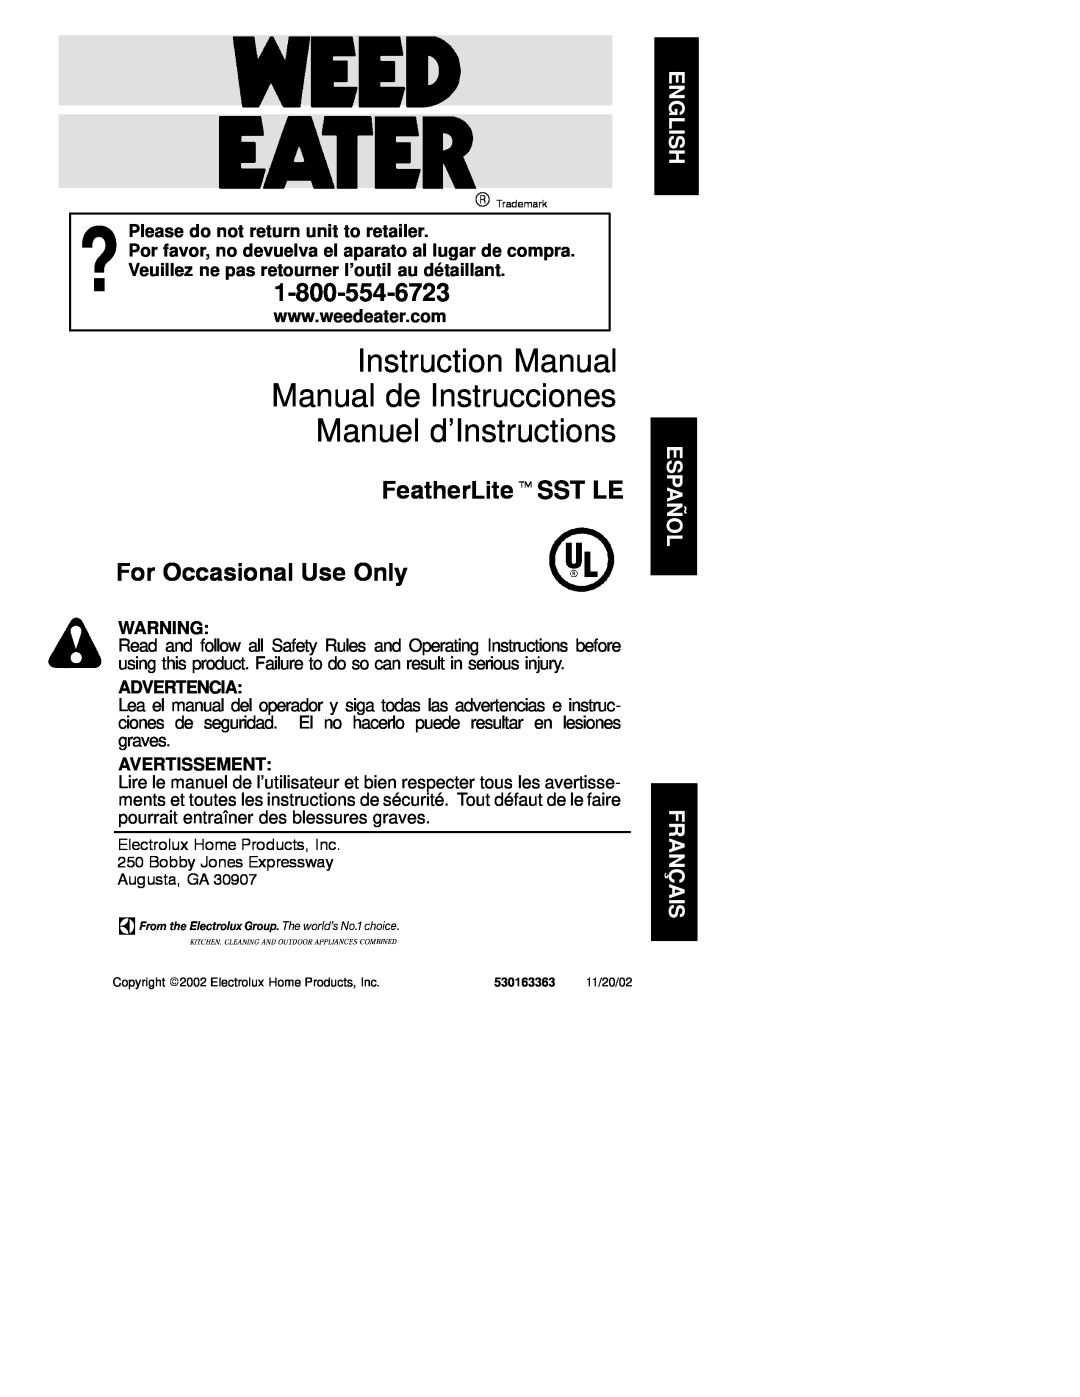 Weed Eater 530163363 instruction manual Please do not return unit to retailer, Advertencia, Avertissement 